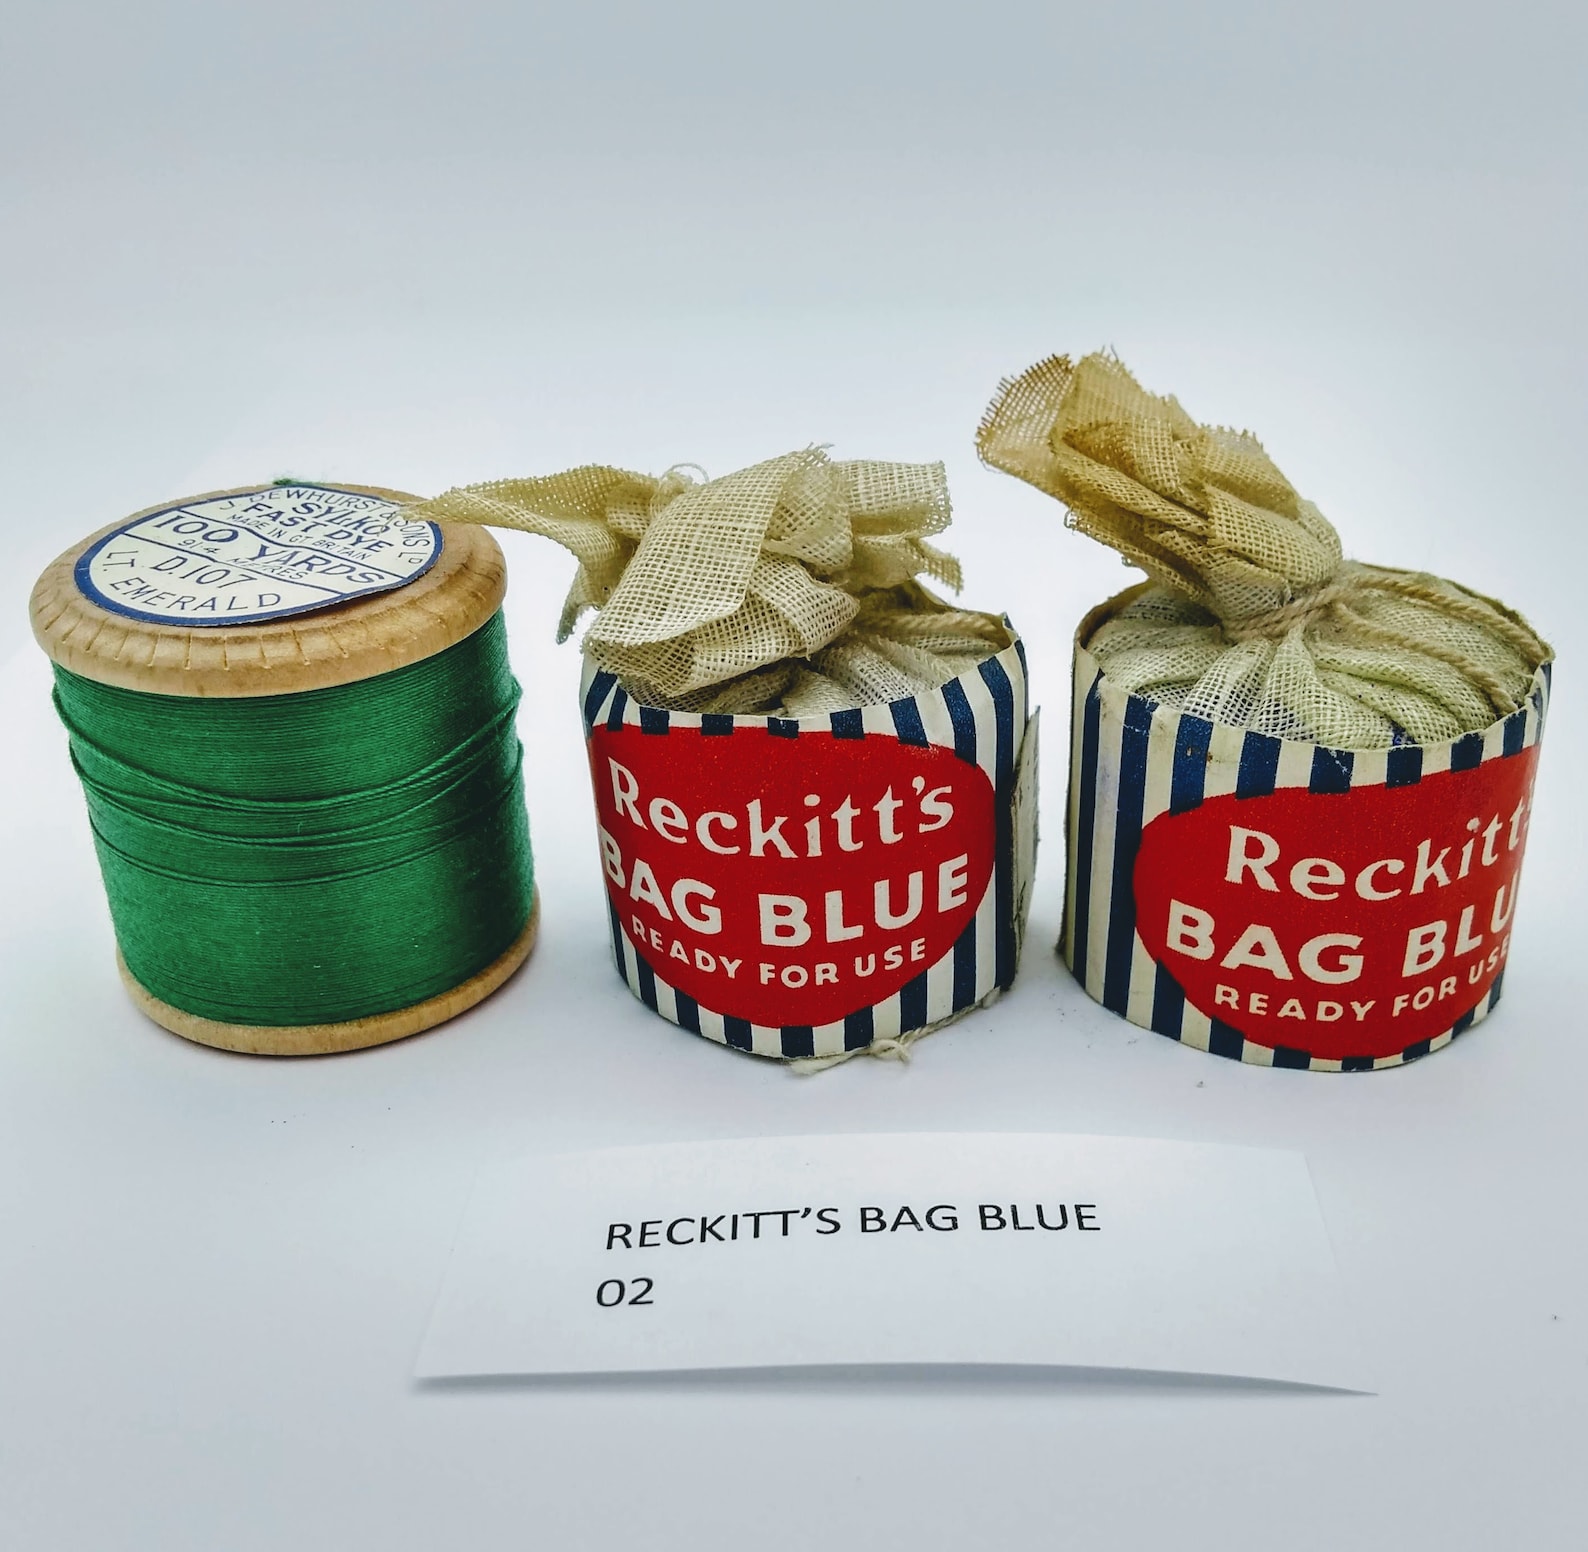 Reckitt's Blue bags, with spool of thread for scale (photo HildasHomeUK, etsy.com)